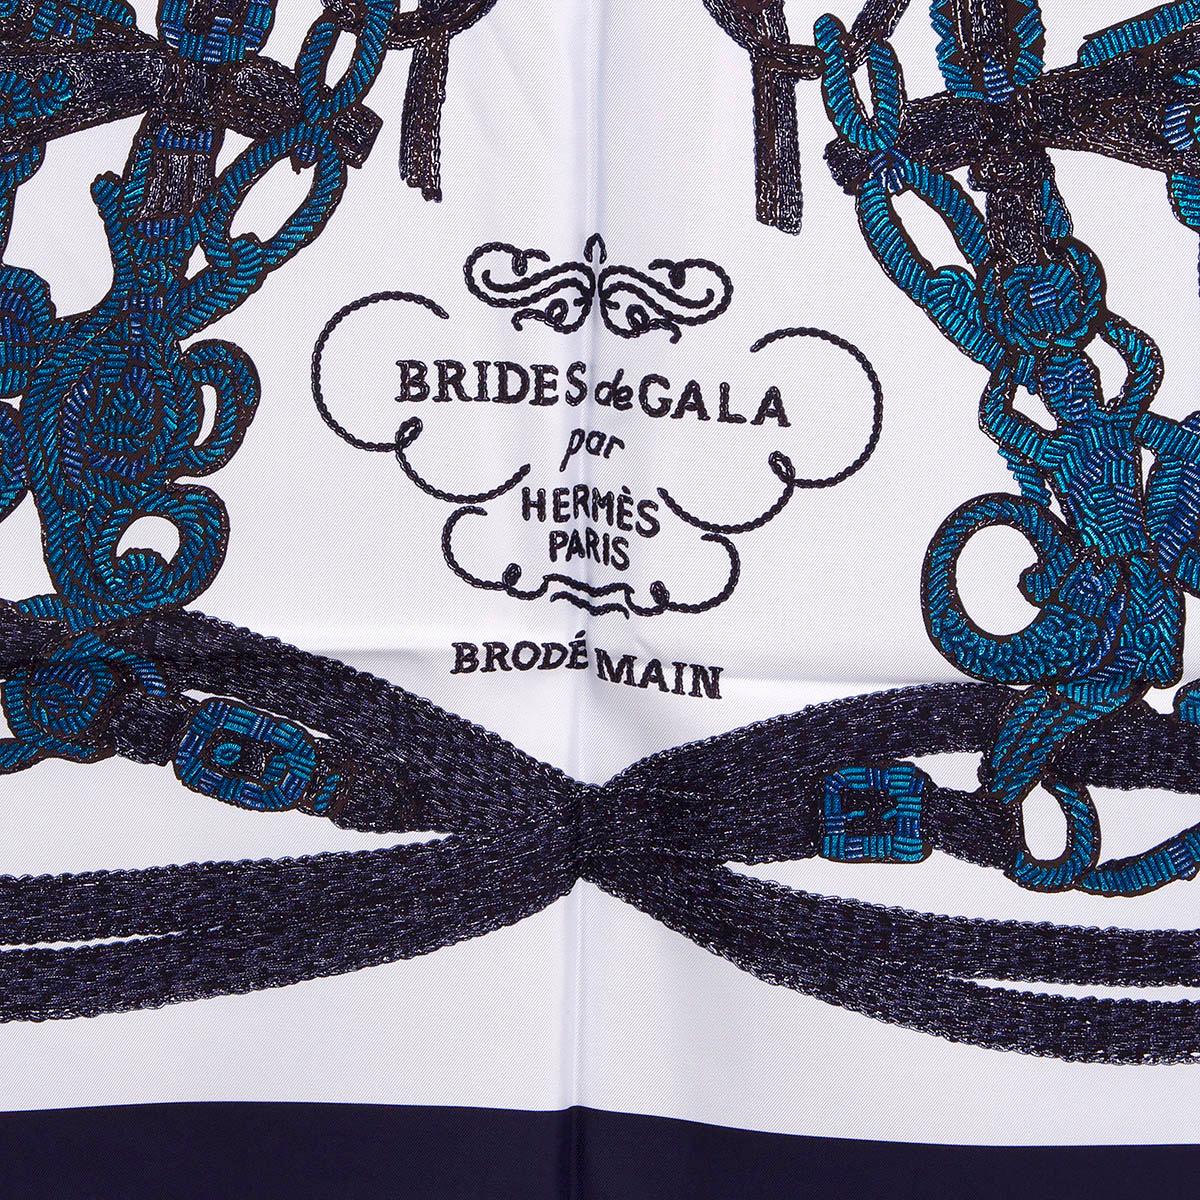 100% authentic Hermès 'Brides de Gala Brode 90' scarf with embroidery over-print originally by Hugo Grygkar and reimagined bei Leila Menchari. In light blue silk twill (100%) with navy border and details in cobalt blue. Brand new with tag.

Issued